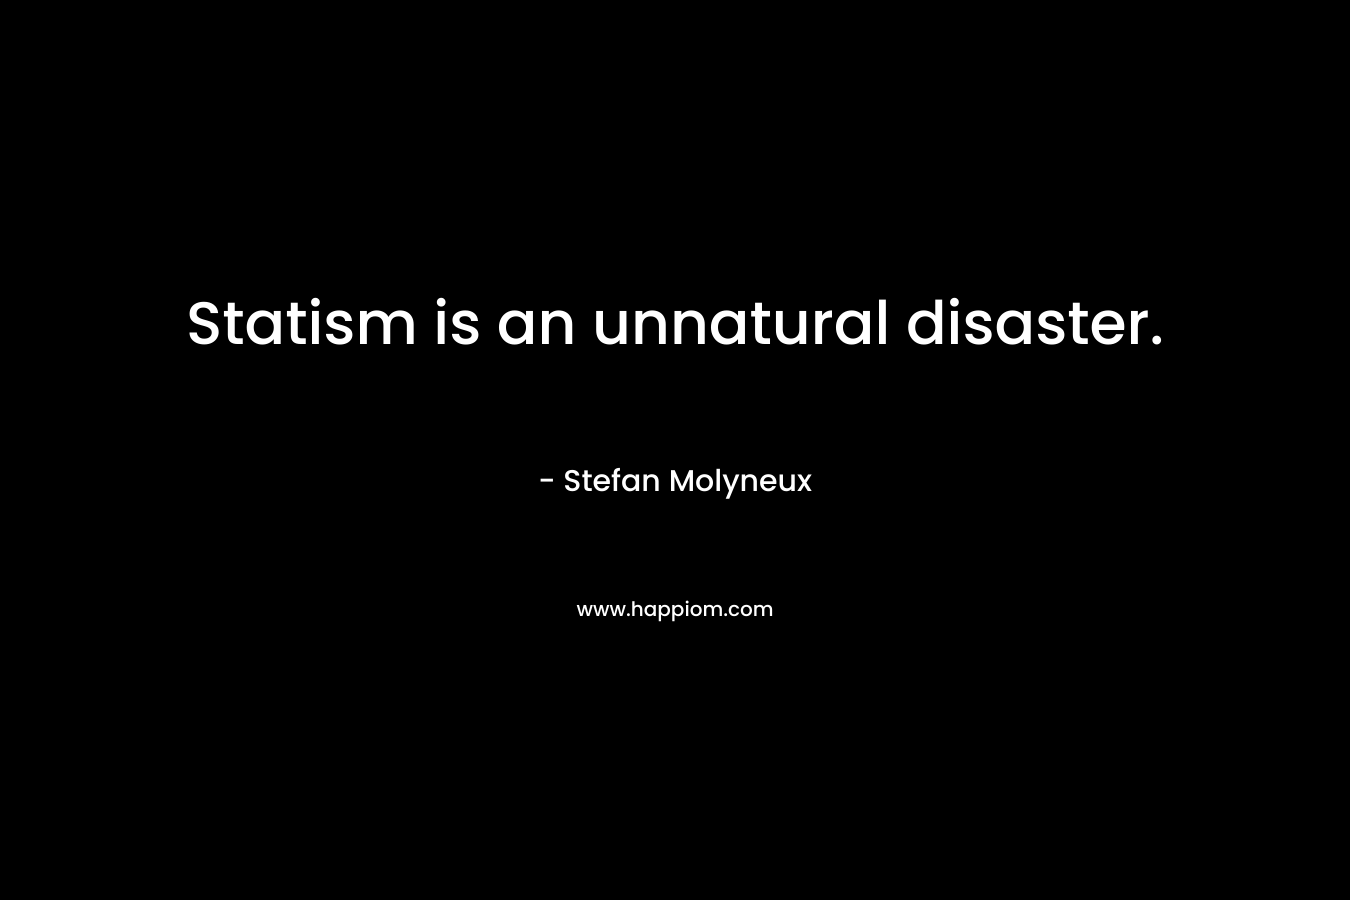 Statism is an unnatural disaster. – Stefan Molyneux